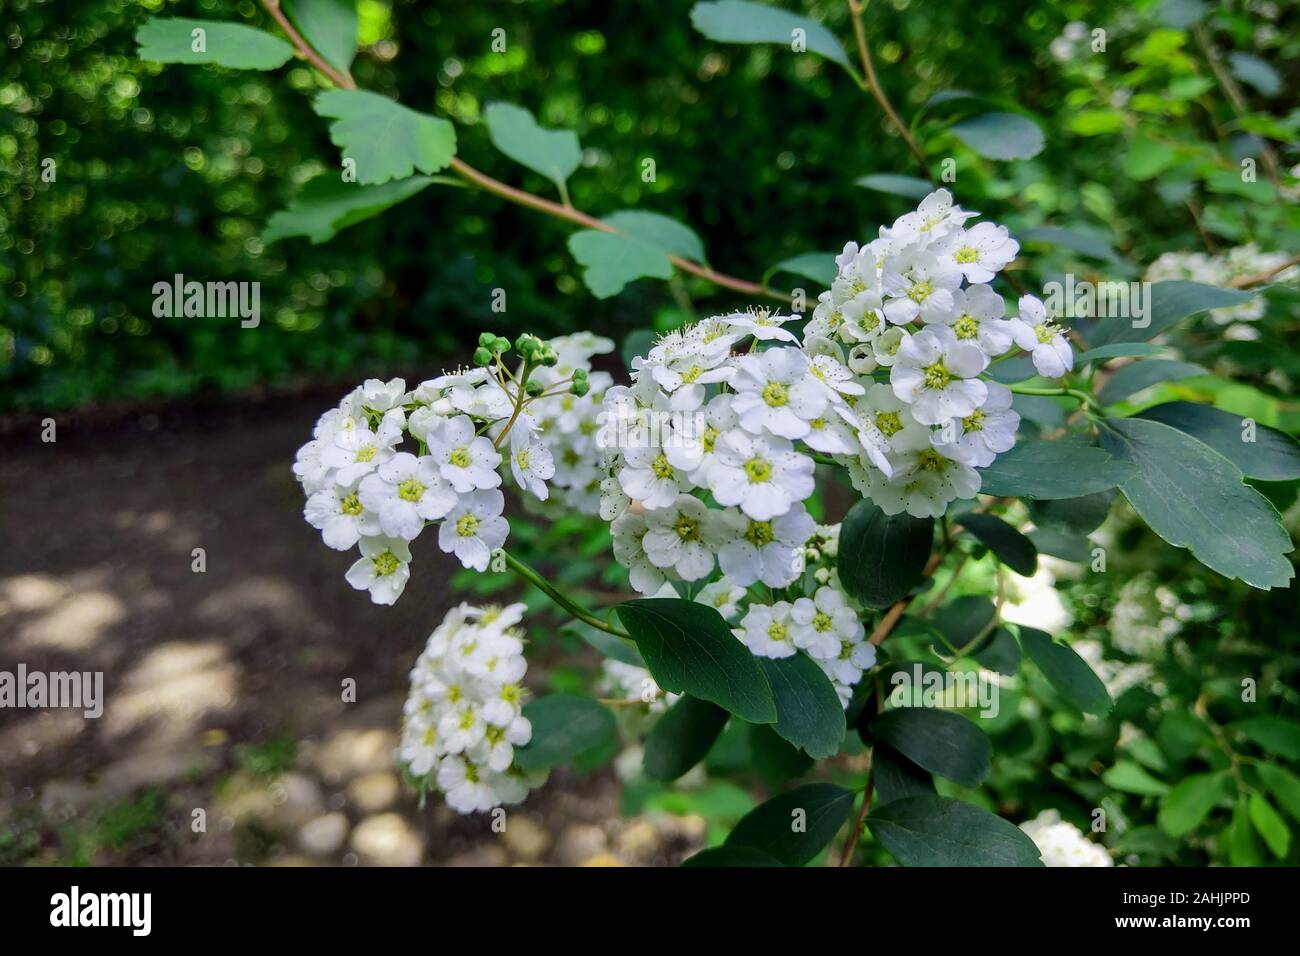 A Guelder rose Viburnum opulus , blooming in a garden Stock Photo